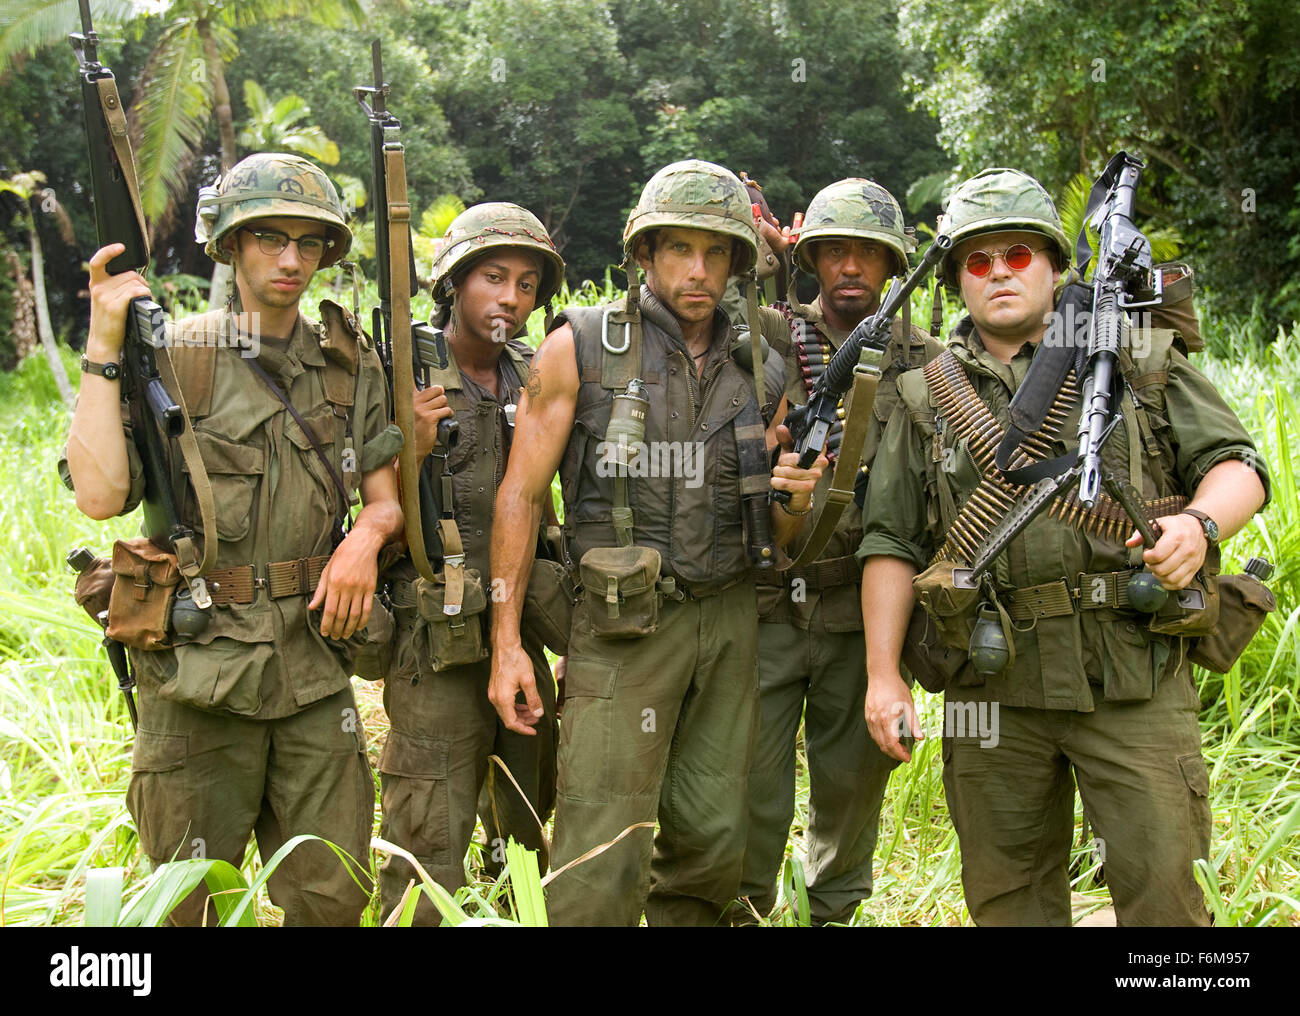 RELEASE DATE: August 15, 2008. MOVIE TITLE: Tropic Thunder. STUDIO: DreamWorks Pictures. PLOT: Through a series of freak occurrences, a group of actors shooting a big-budget war movie are forced to become the soldiers they are portraying. PICTURED: JAY BARUCHEL as Kevin Sandusky, BRANDON T. JACKSON as Alpa Chino, BEN STILLER as Tugg Speedman, ROBERT DOWNEY JR. as Kirk Lazarus and JACK BLACK as Jeff Portnoy. Stock Photo